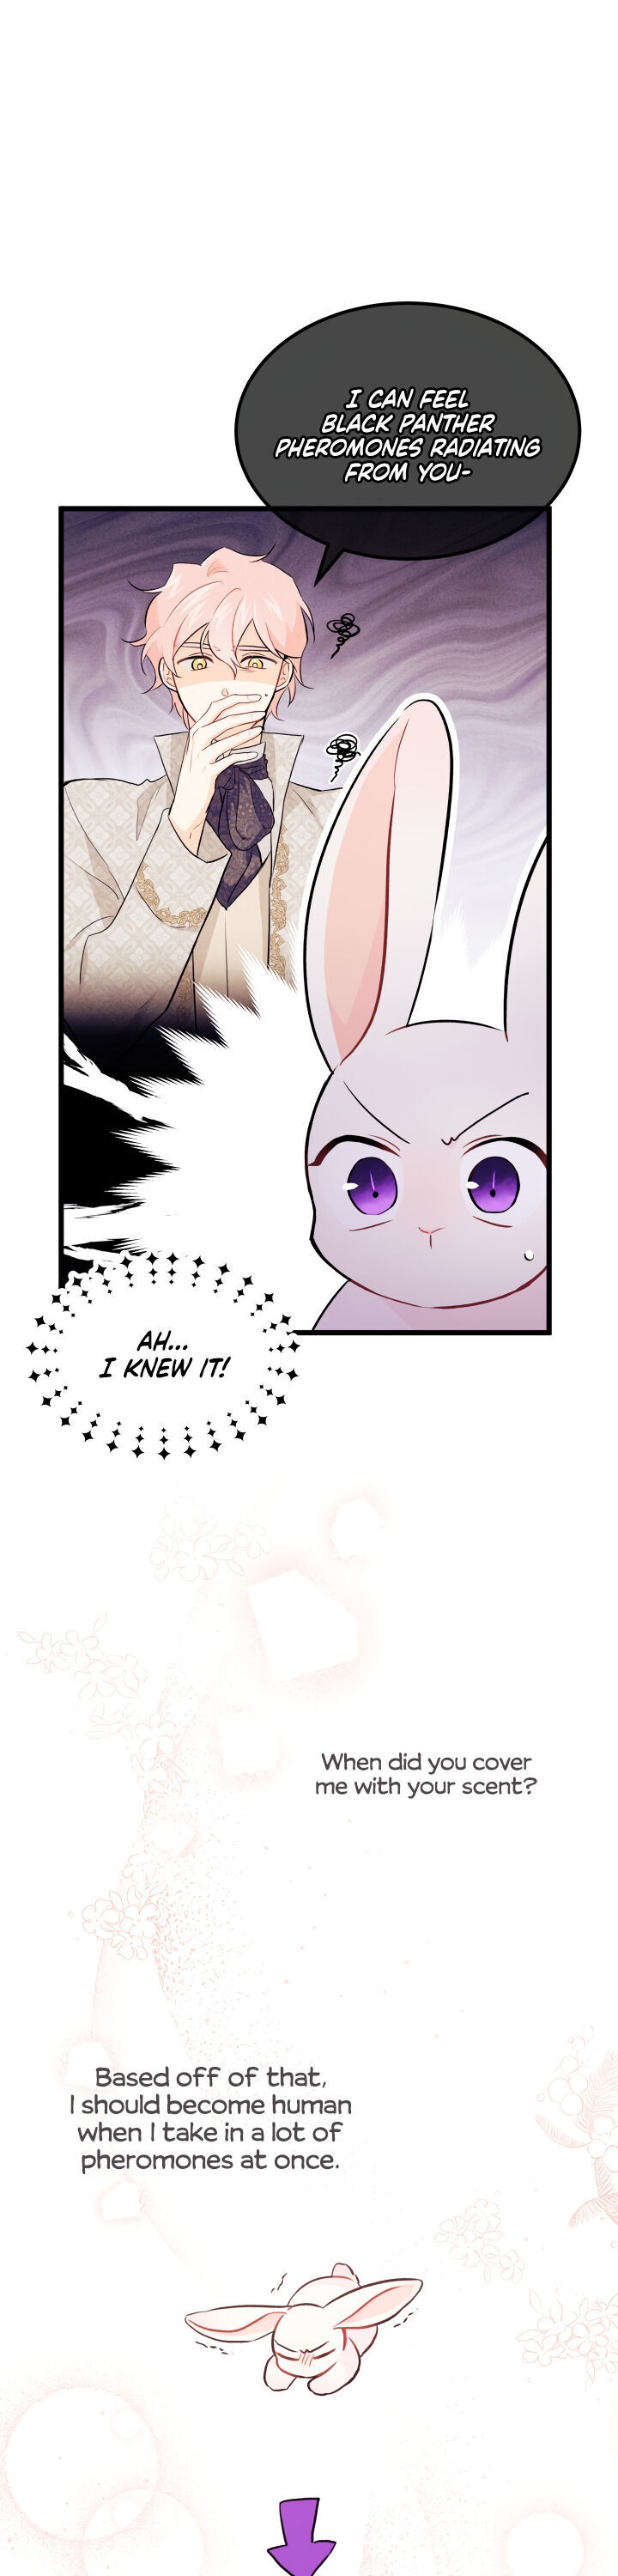 The Symbiotic Relationship Between A Rabbit and A Black Panther - Chapter 22 Page 14